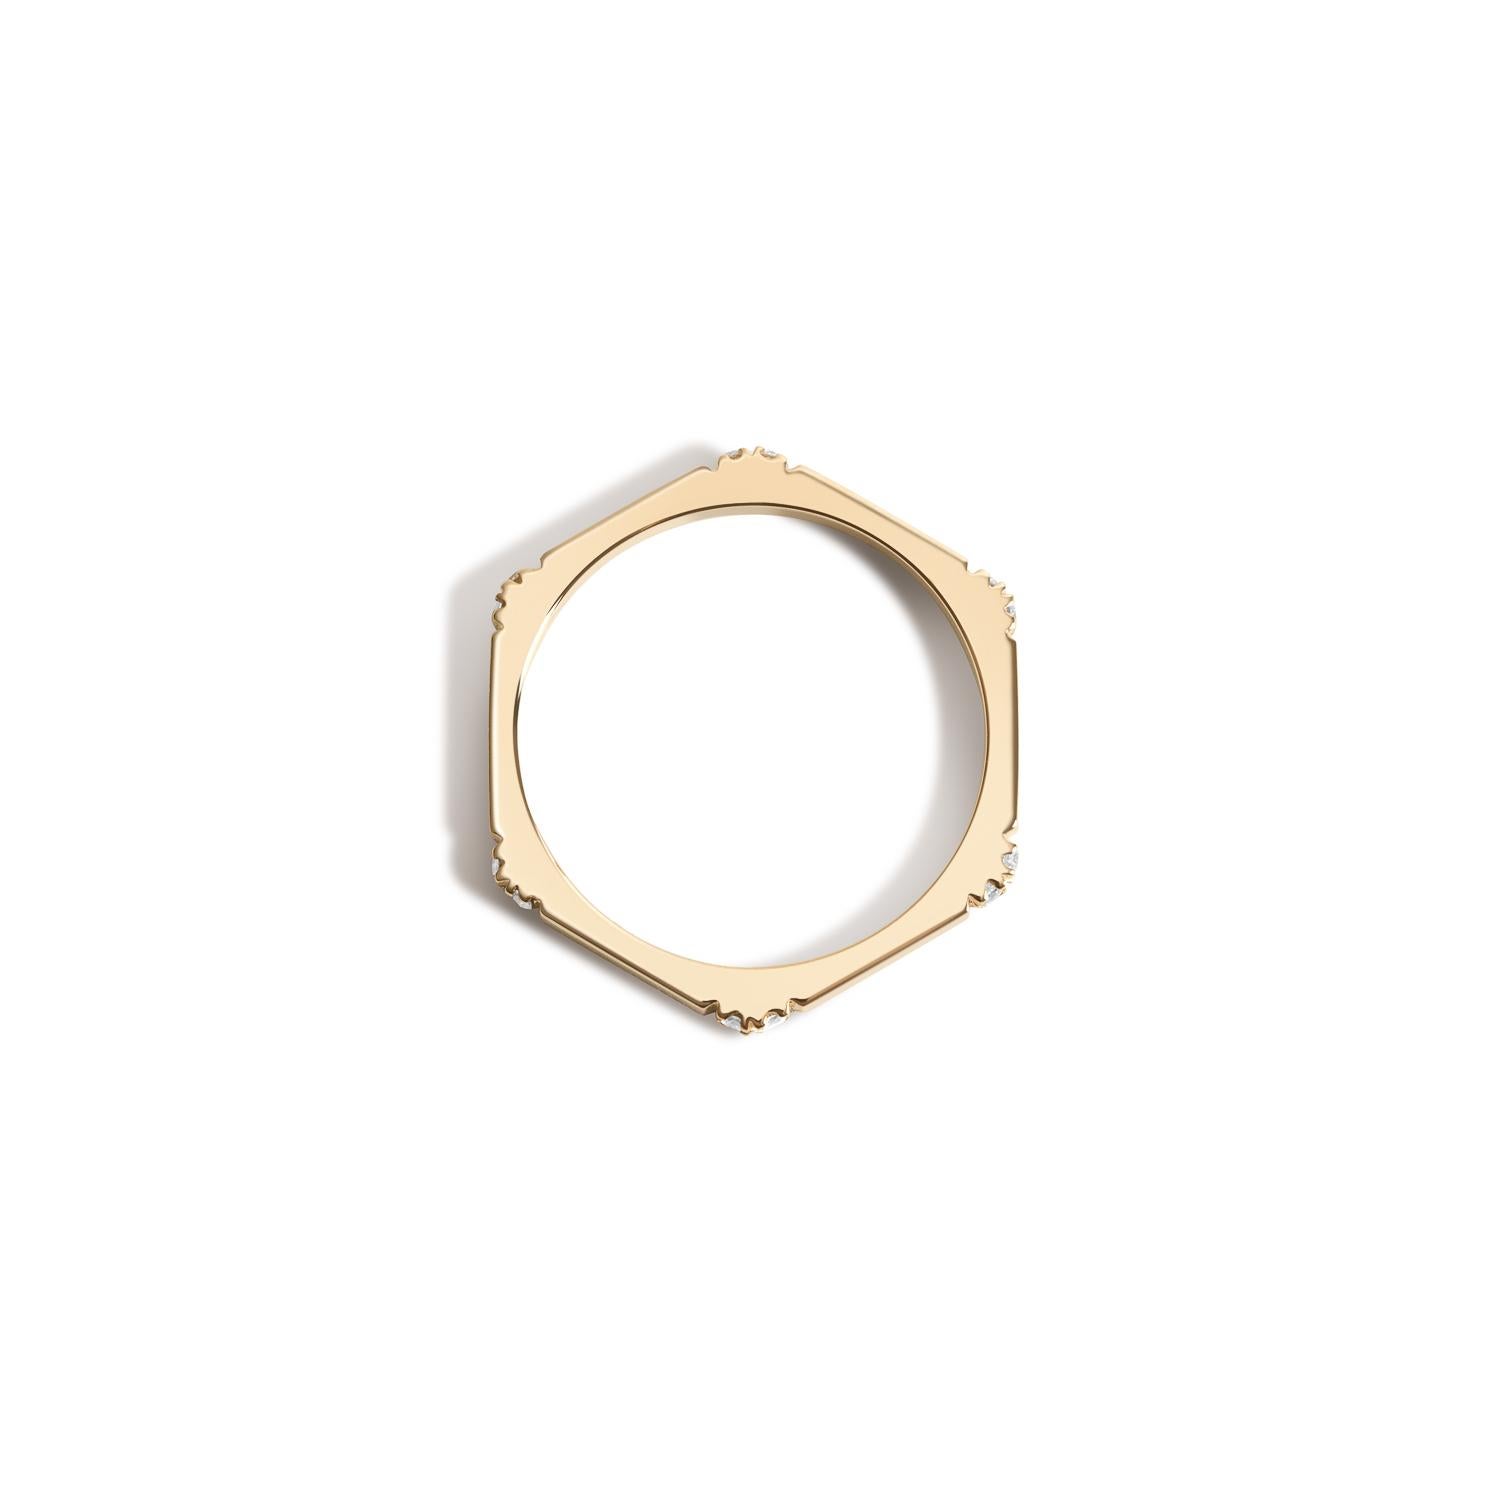 Diamonds at each corner add even more depth to SELIN KENT's signature Hex style’s geometric interest. Looks lovely worn solo or stacked with other rings.

- Diamond carat weight: 0.12 cts 
- 14k yellow gold (customizable in other colors of gold)
-